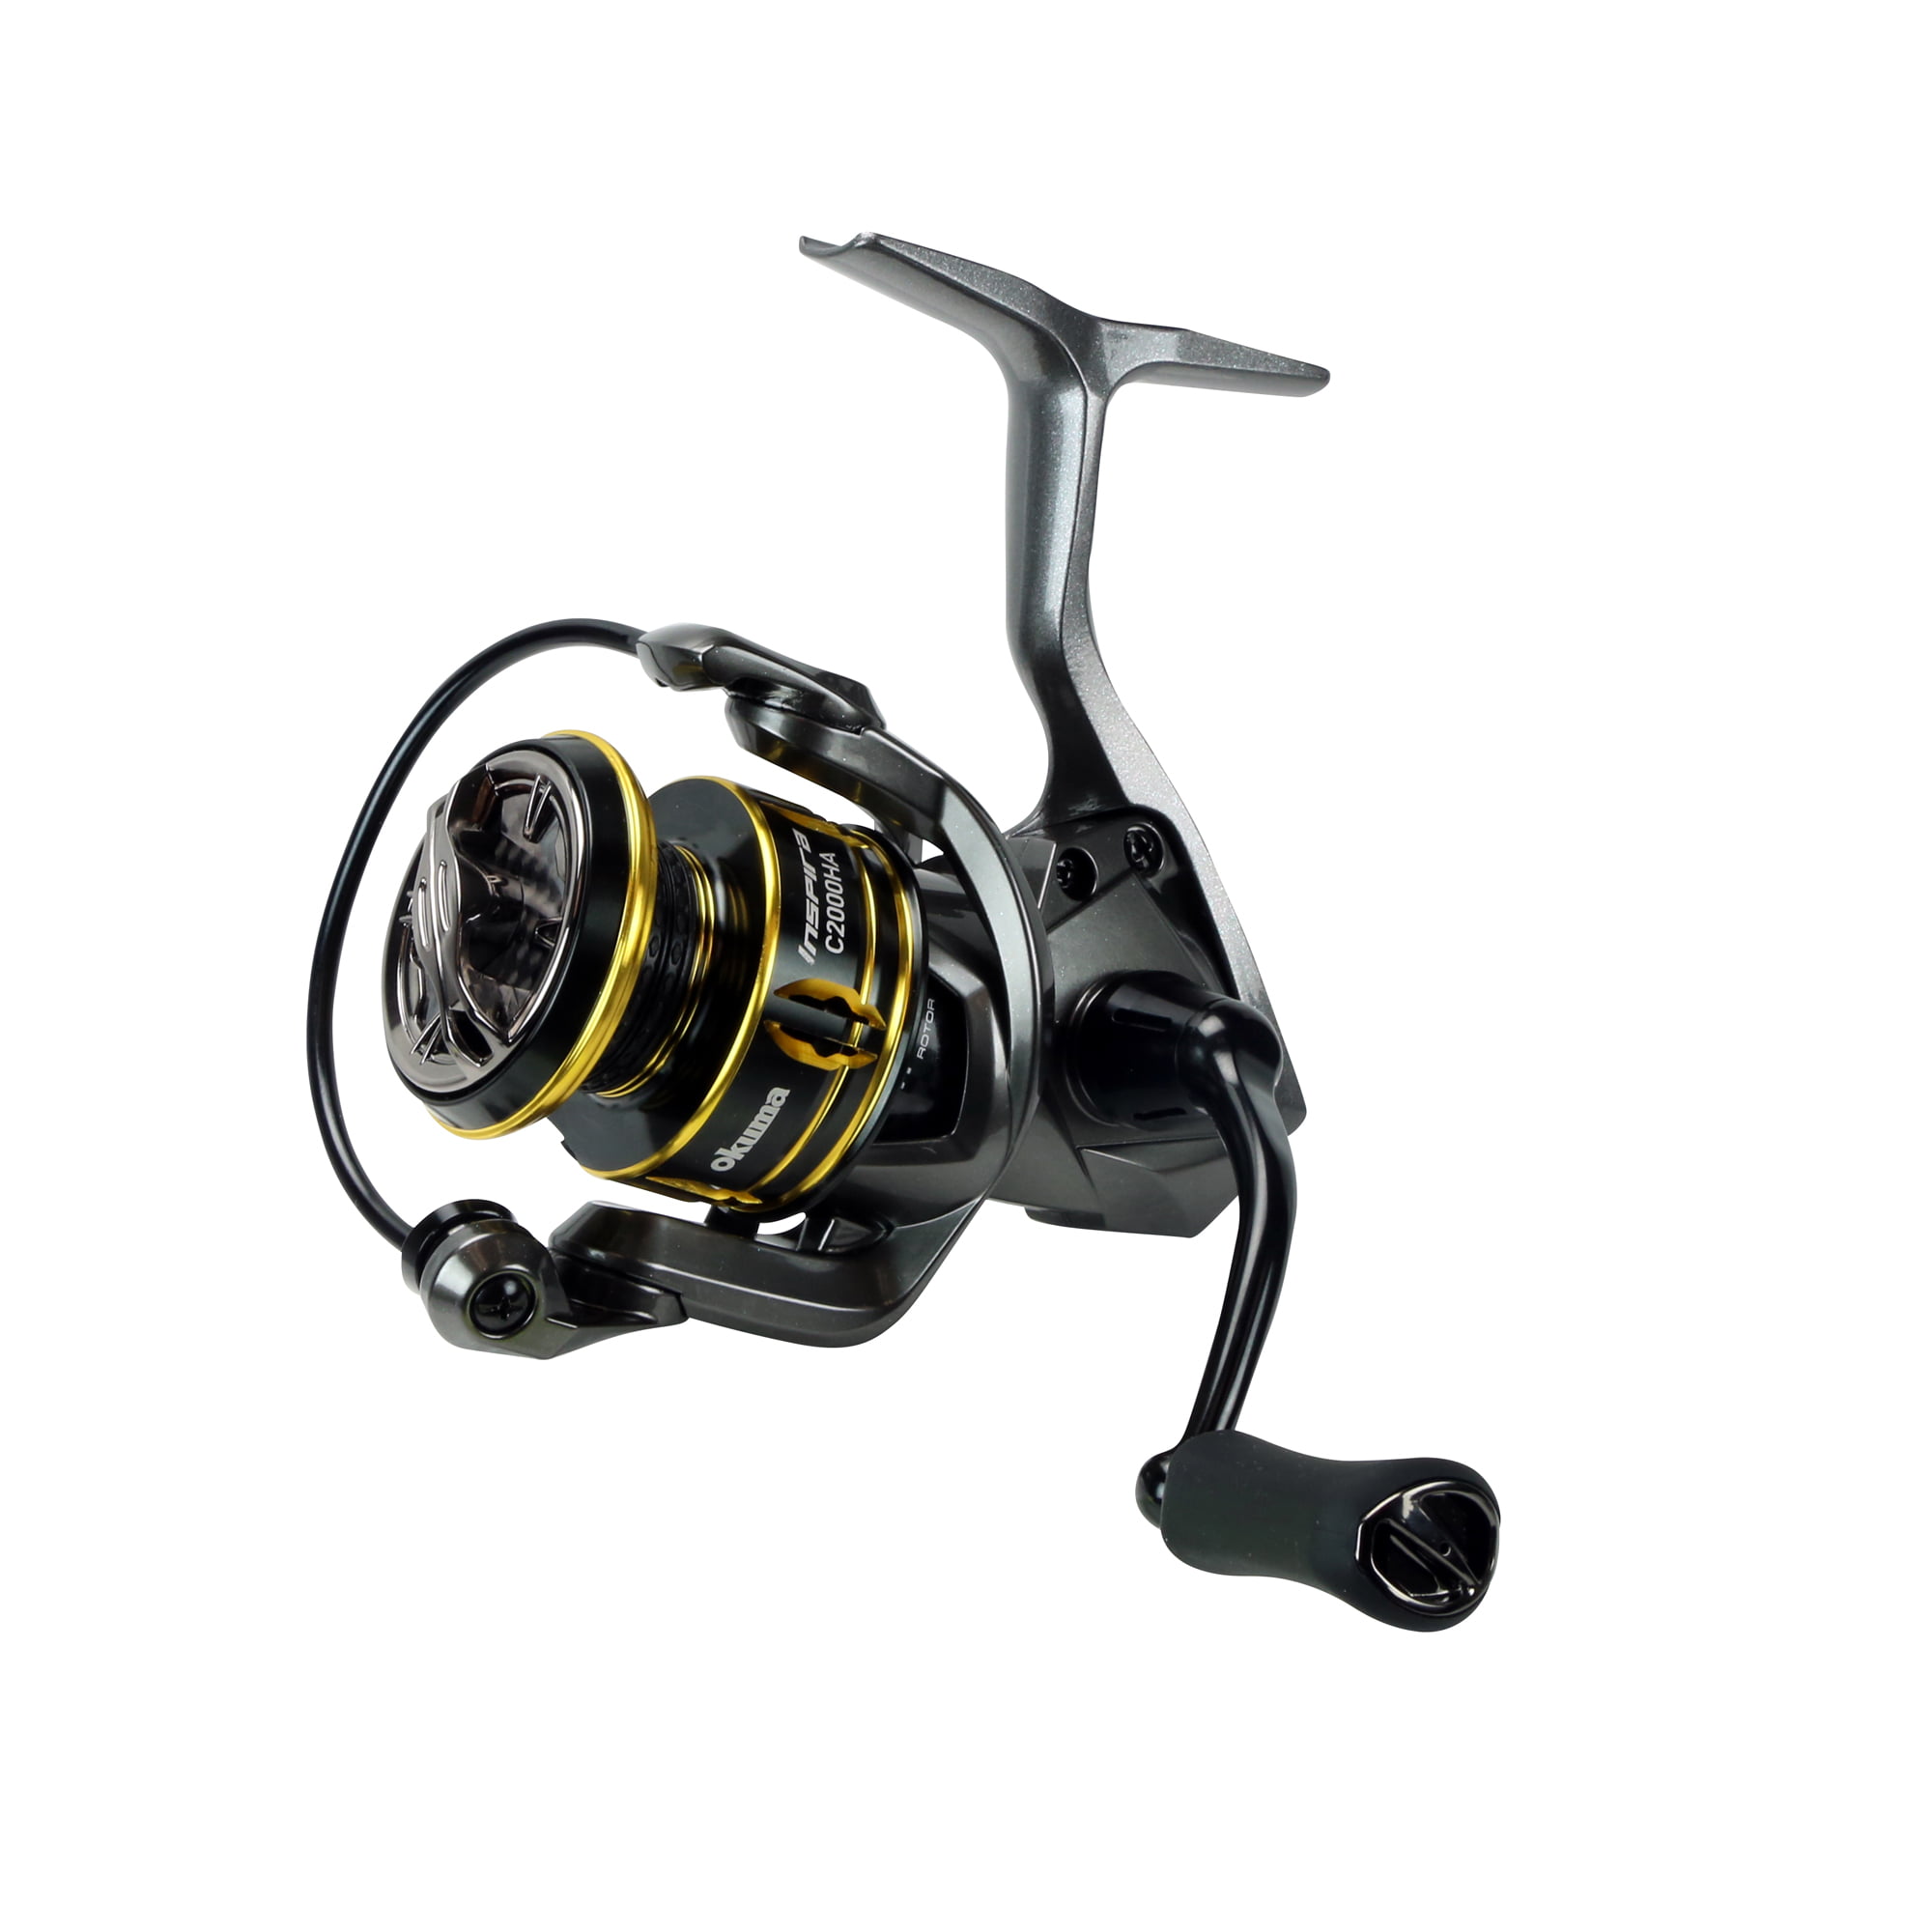 7 New Heavy-Duty Spinning Reels for 2018